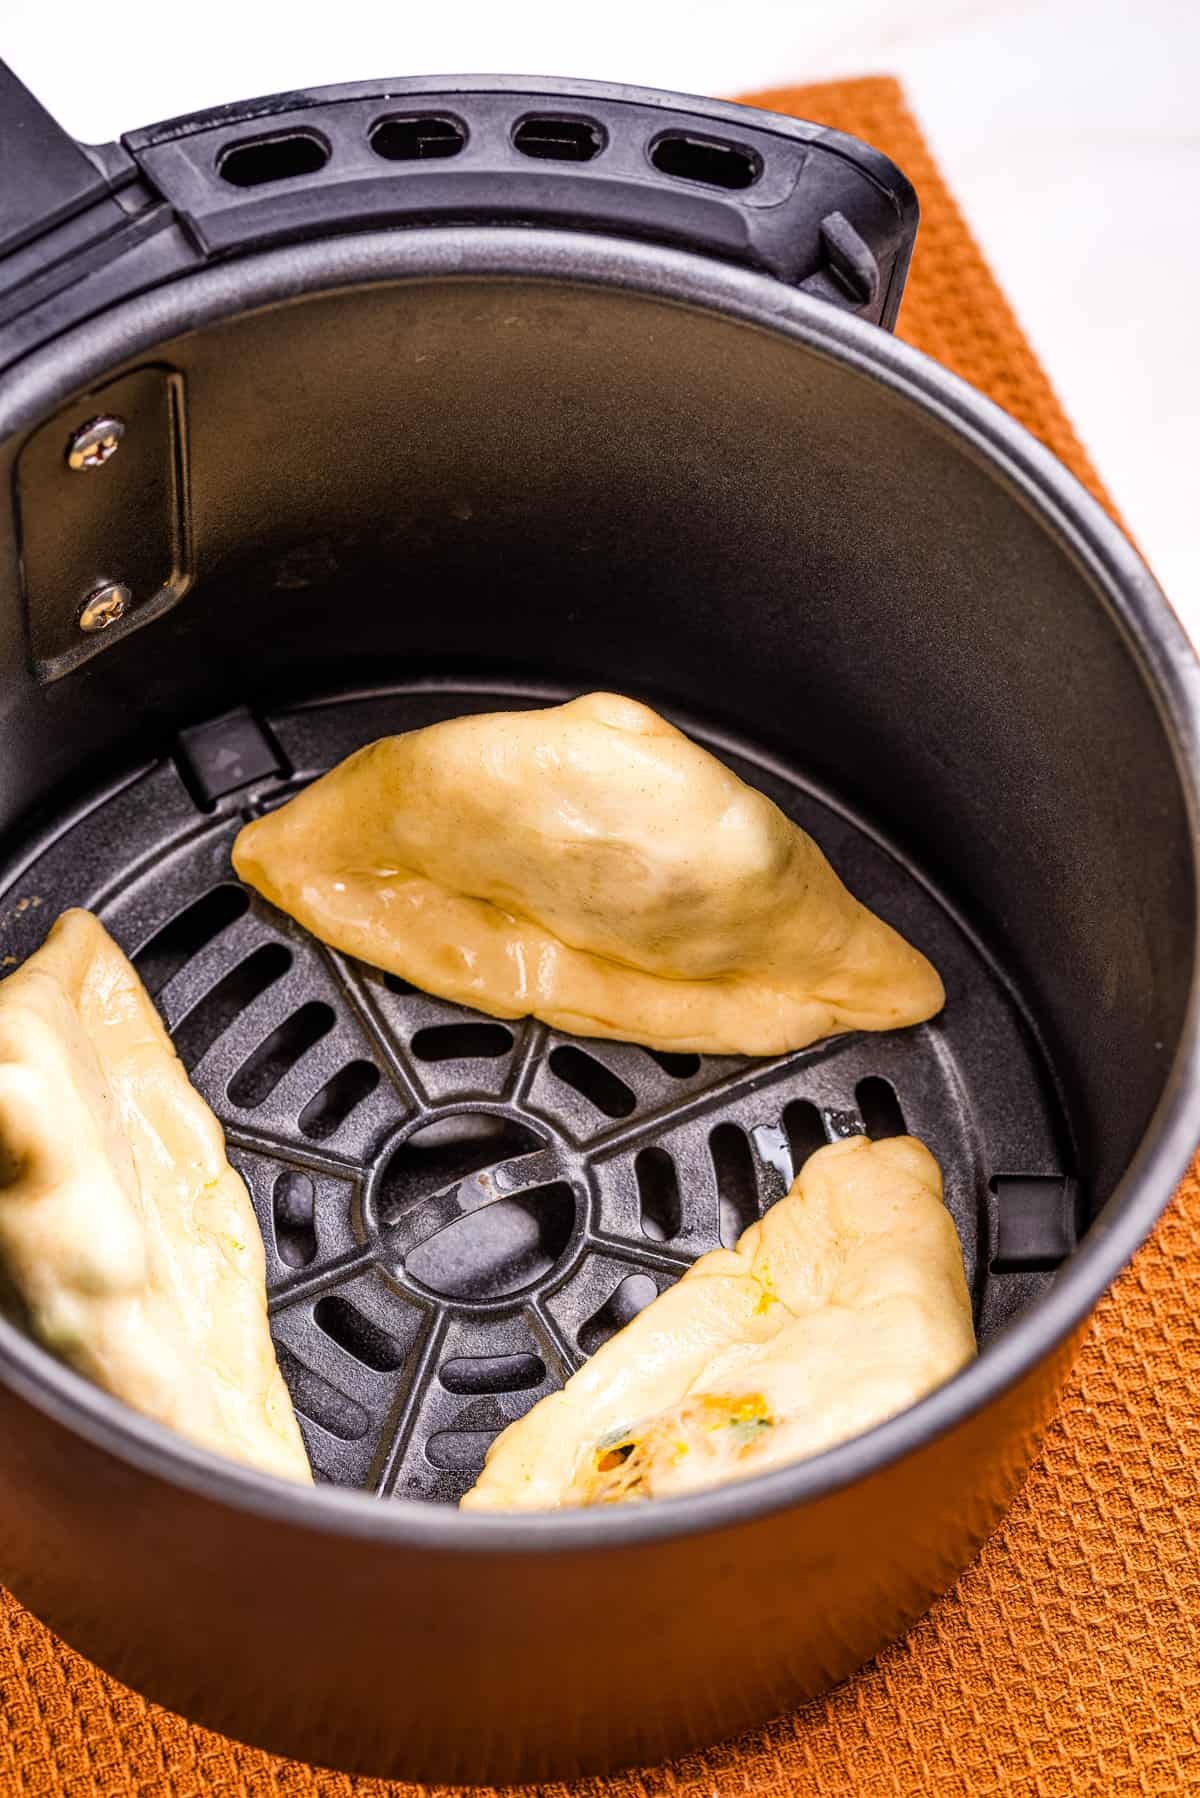 An image of samosa being cooked in the air fryer.